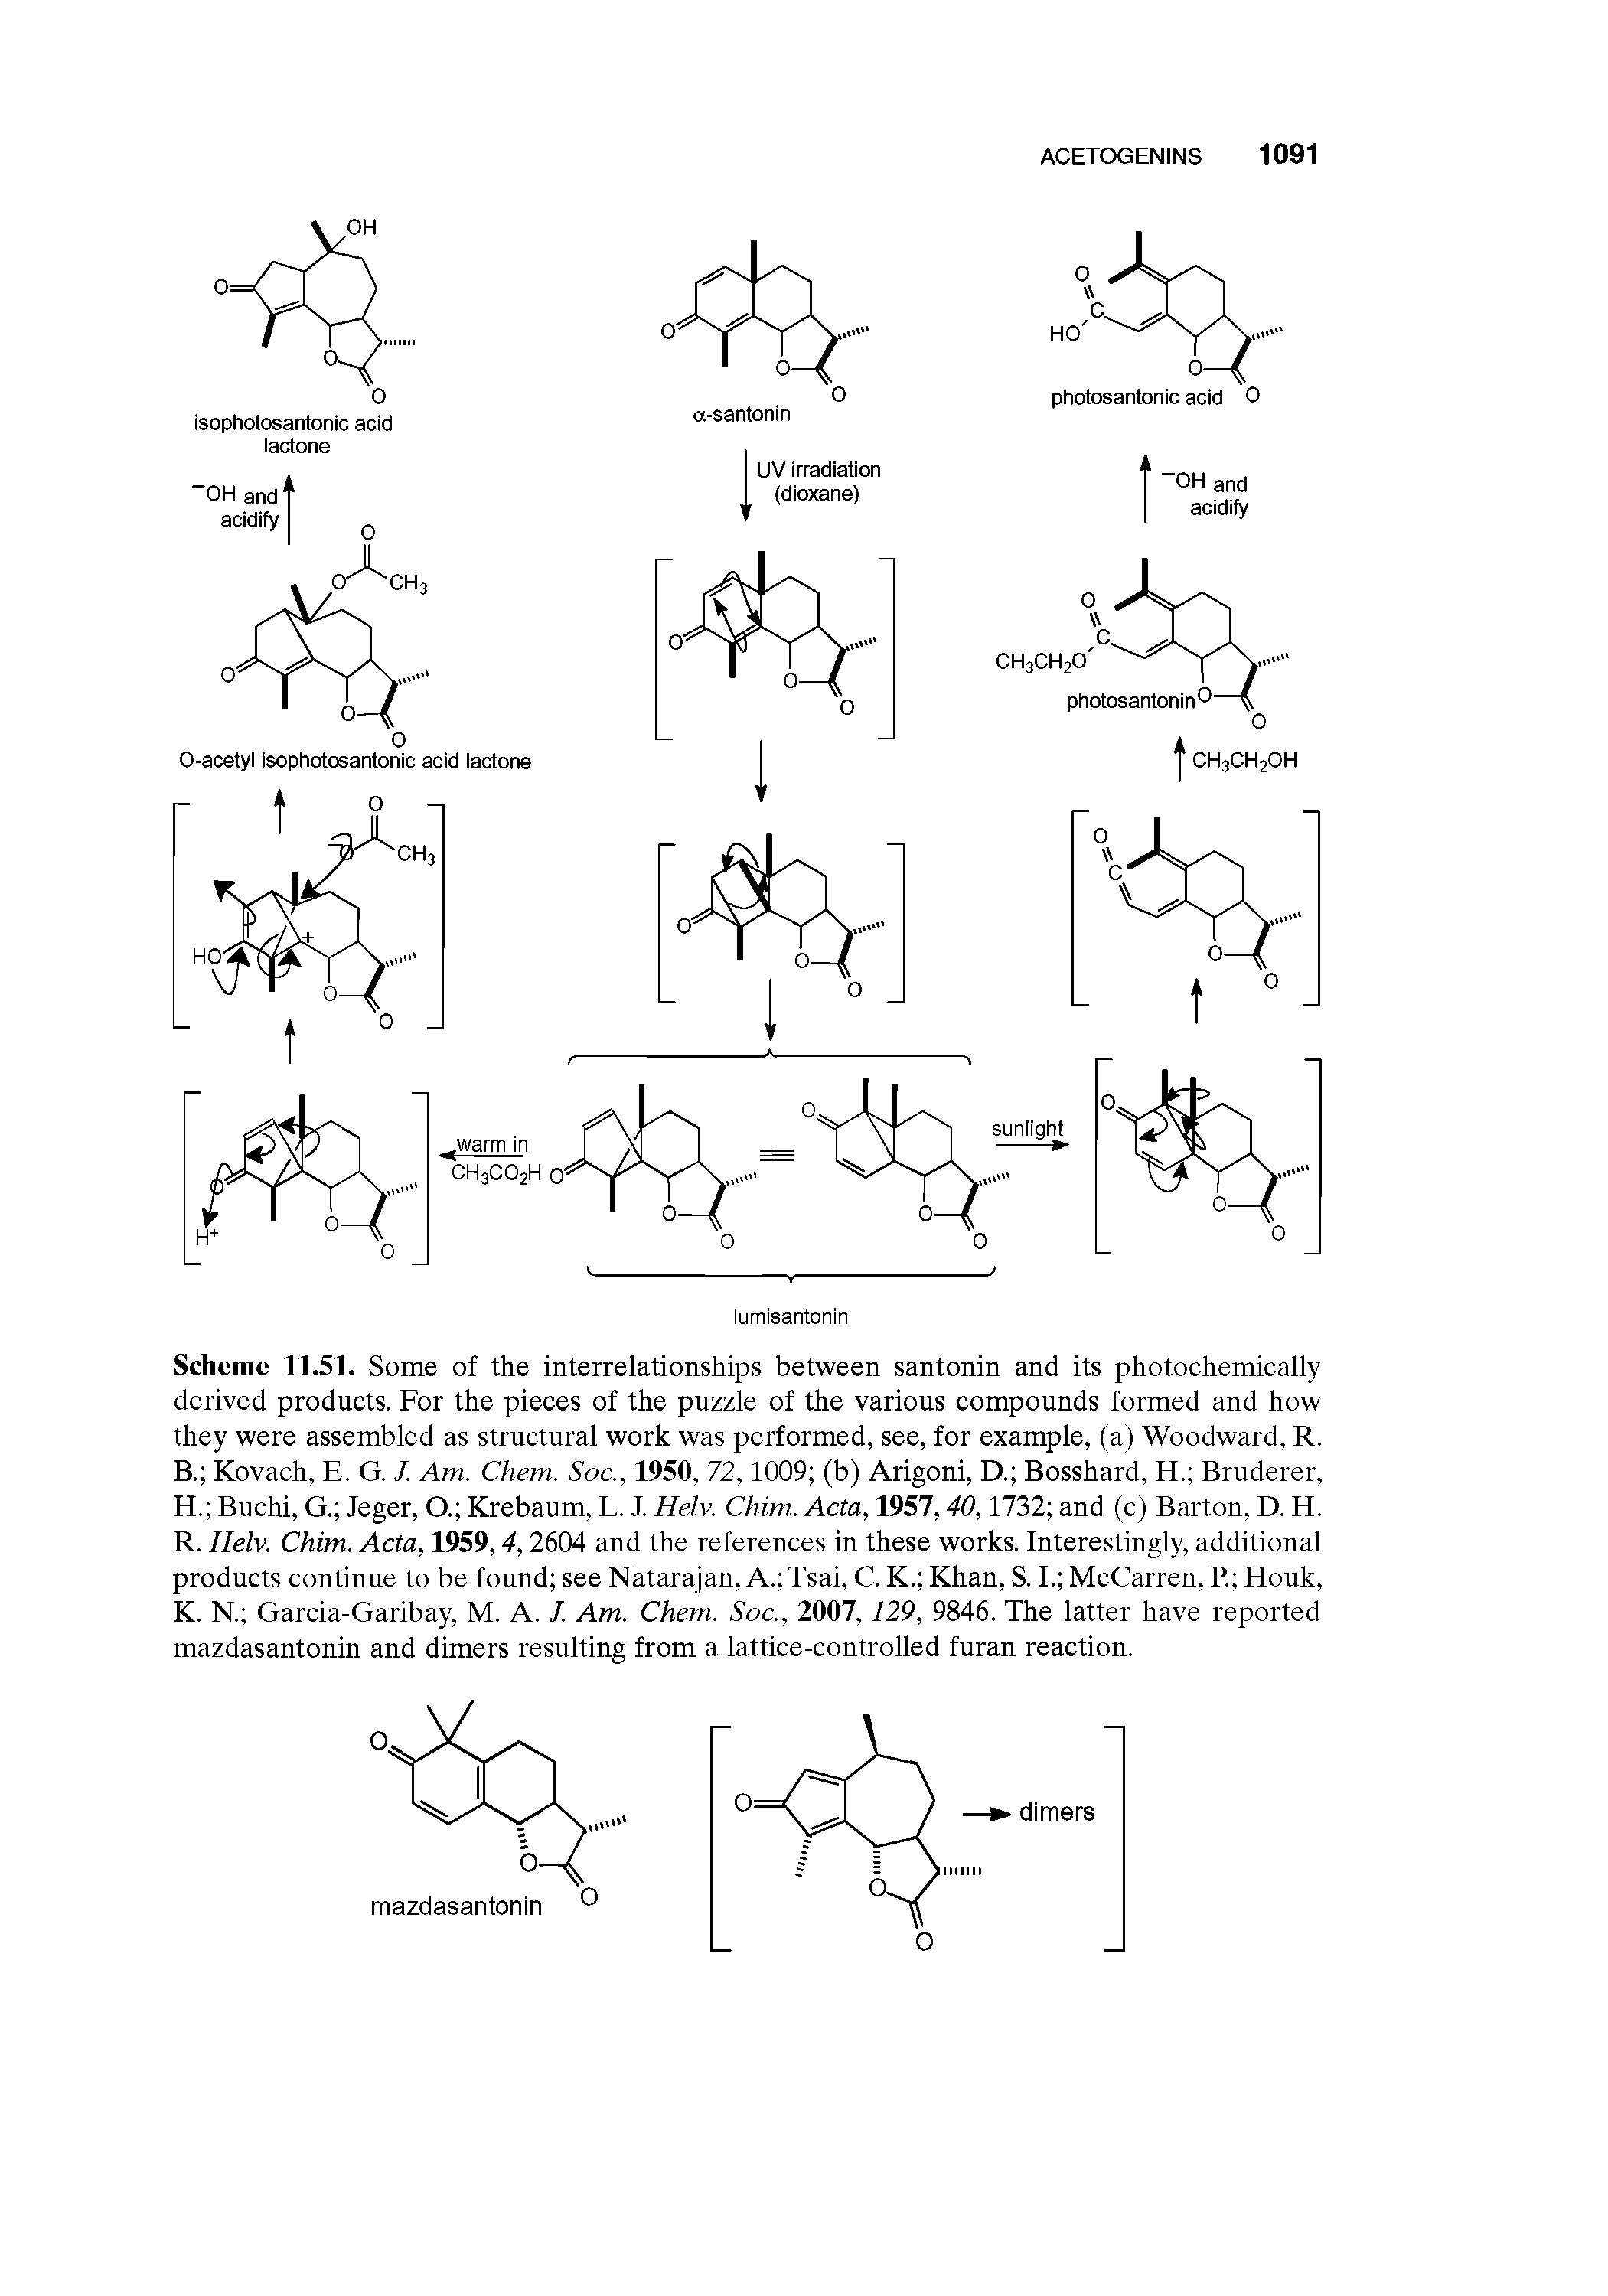 Scheme 11.51. Some of the interrelationships between santonin and its photochemically derived products. For the pieces of the puzzle of the various compounds formed and how they were assembled as structural work was performed, see, for example, (a) Woodward, R. B. Kovach, E. G. J. Am. Chem. Soc., 1950, 72,1009 (b) Arigoni, D. Bosshard, H. Bruderer, H. Buchi, G. Jeger, O. Krebaum, L. J. Helv. Chim. Acta, 1957,40,1732 and (c) Barton, D. H. R. Helv. Chim. Acta, 1959,4,2604 and the references in these works. Interestingly, additional products continue to be found see Natarajan, A. Tsai, C. K. Khan, S. I. McCarren, R Honk, K. N. Garcia-Garibay, M. A. J. Am. Chem. Soc., 2007,129, 9846. The latter have reported mazdasantonin and dimers resulting from a lattice-controlled furan reaction.